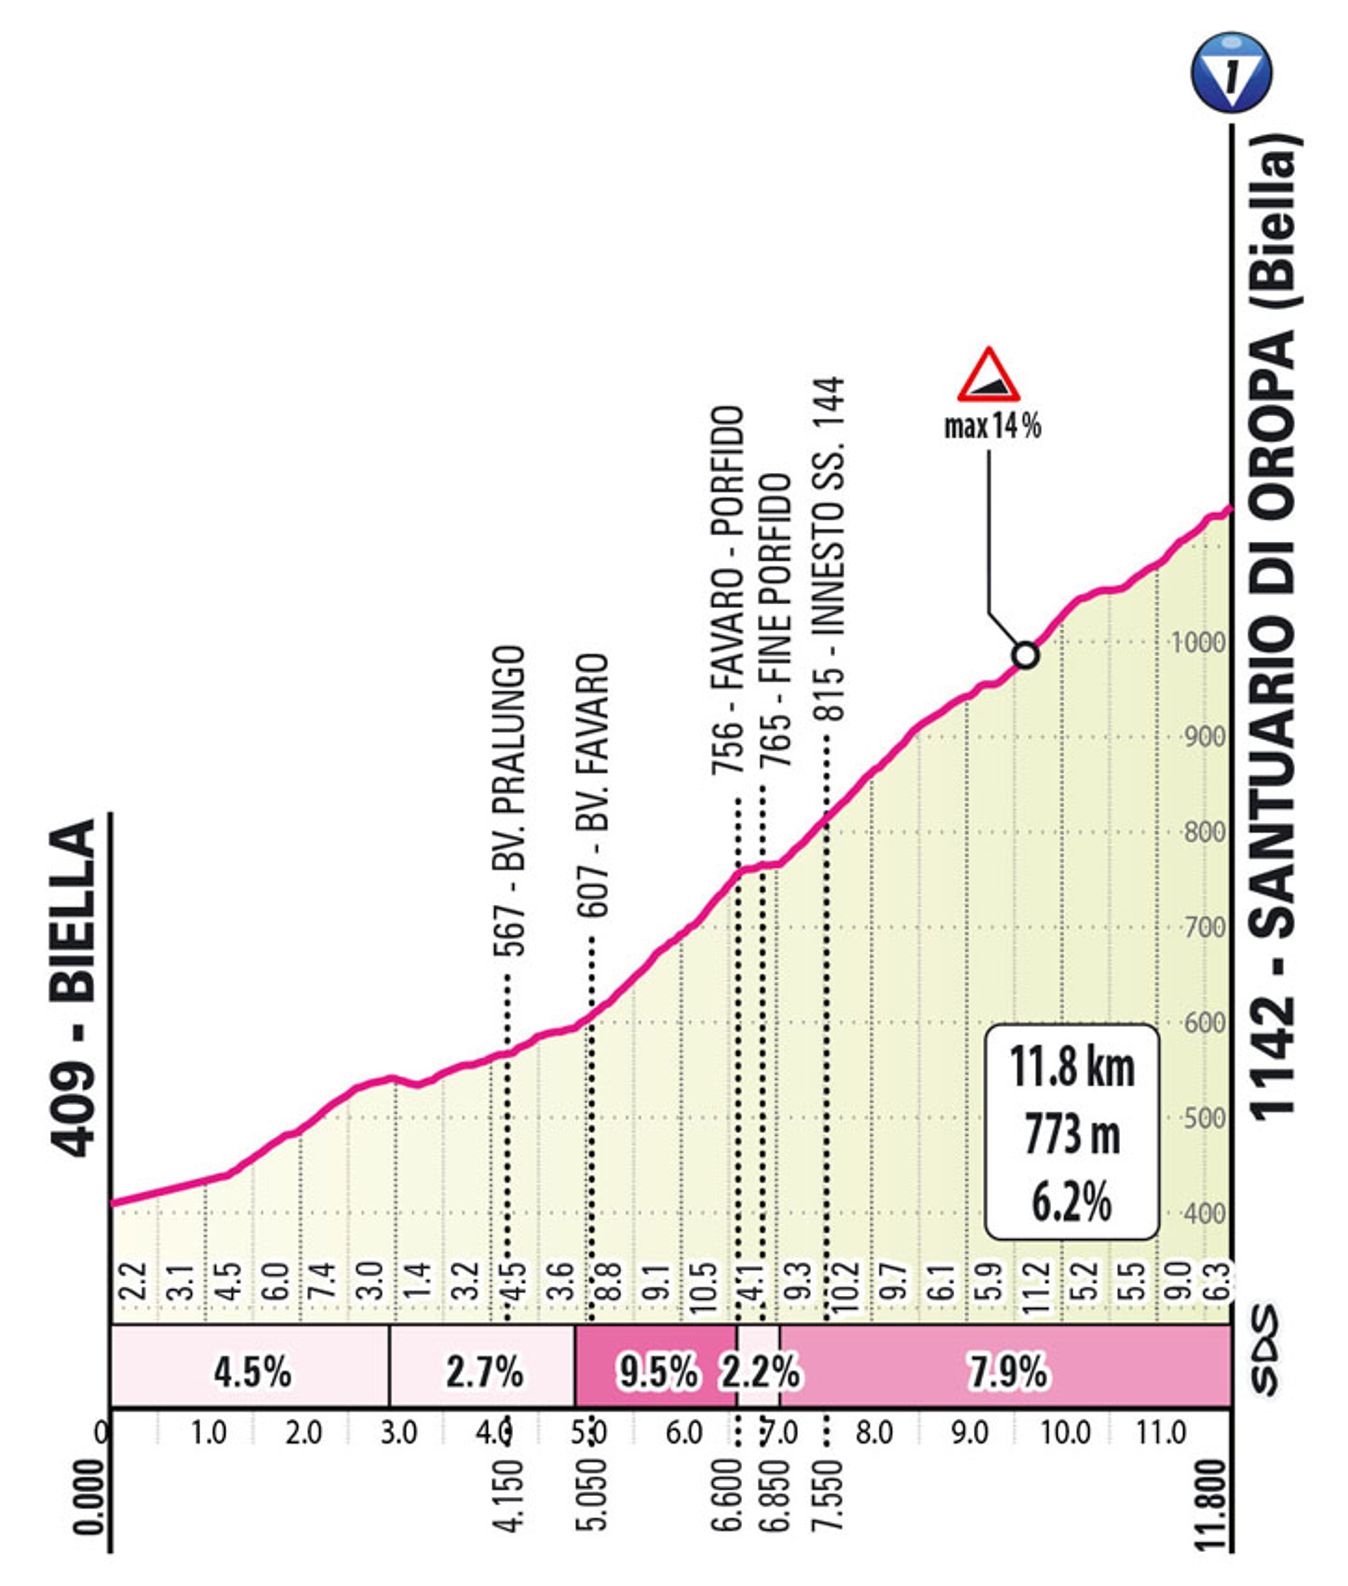 The profile of the finishing climb to Oropa 